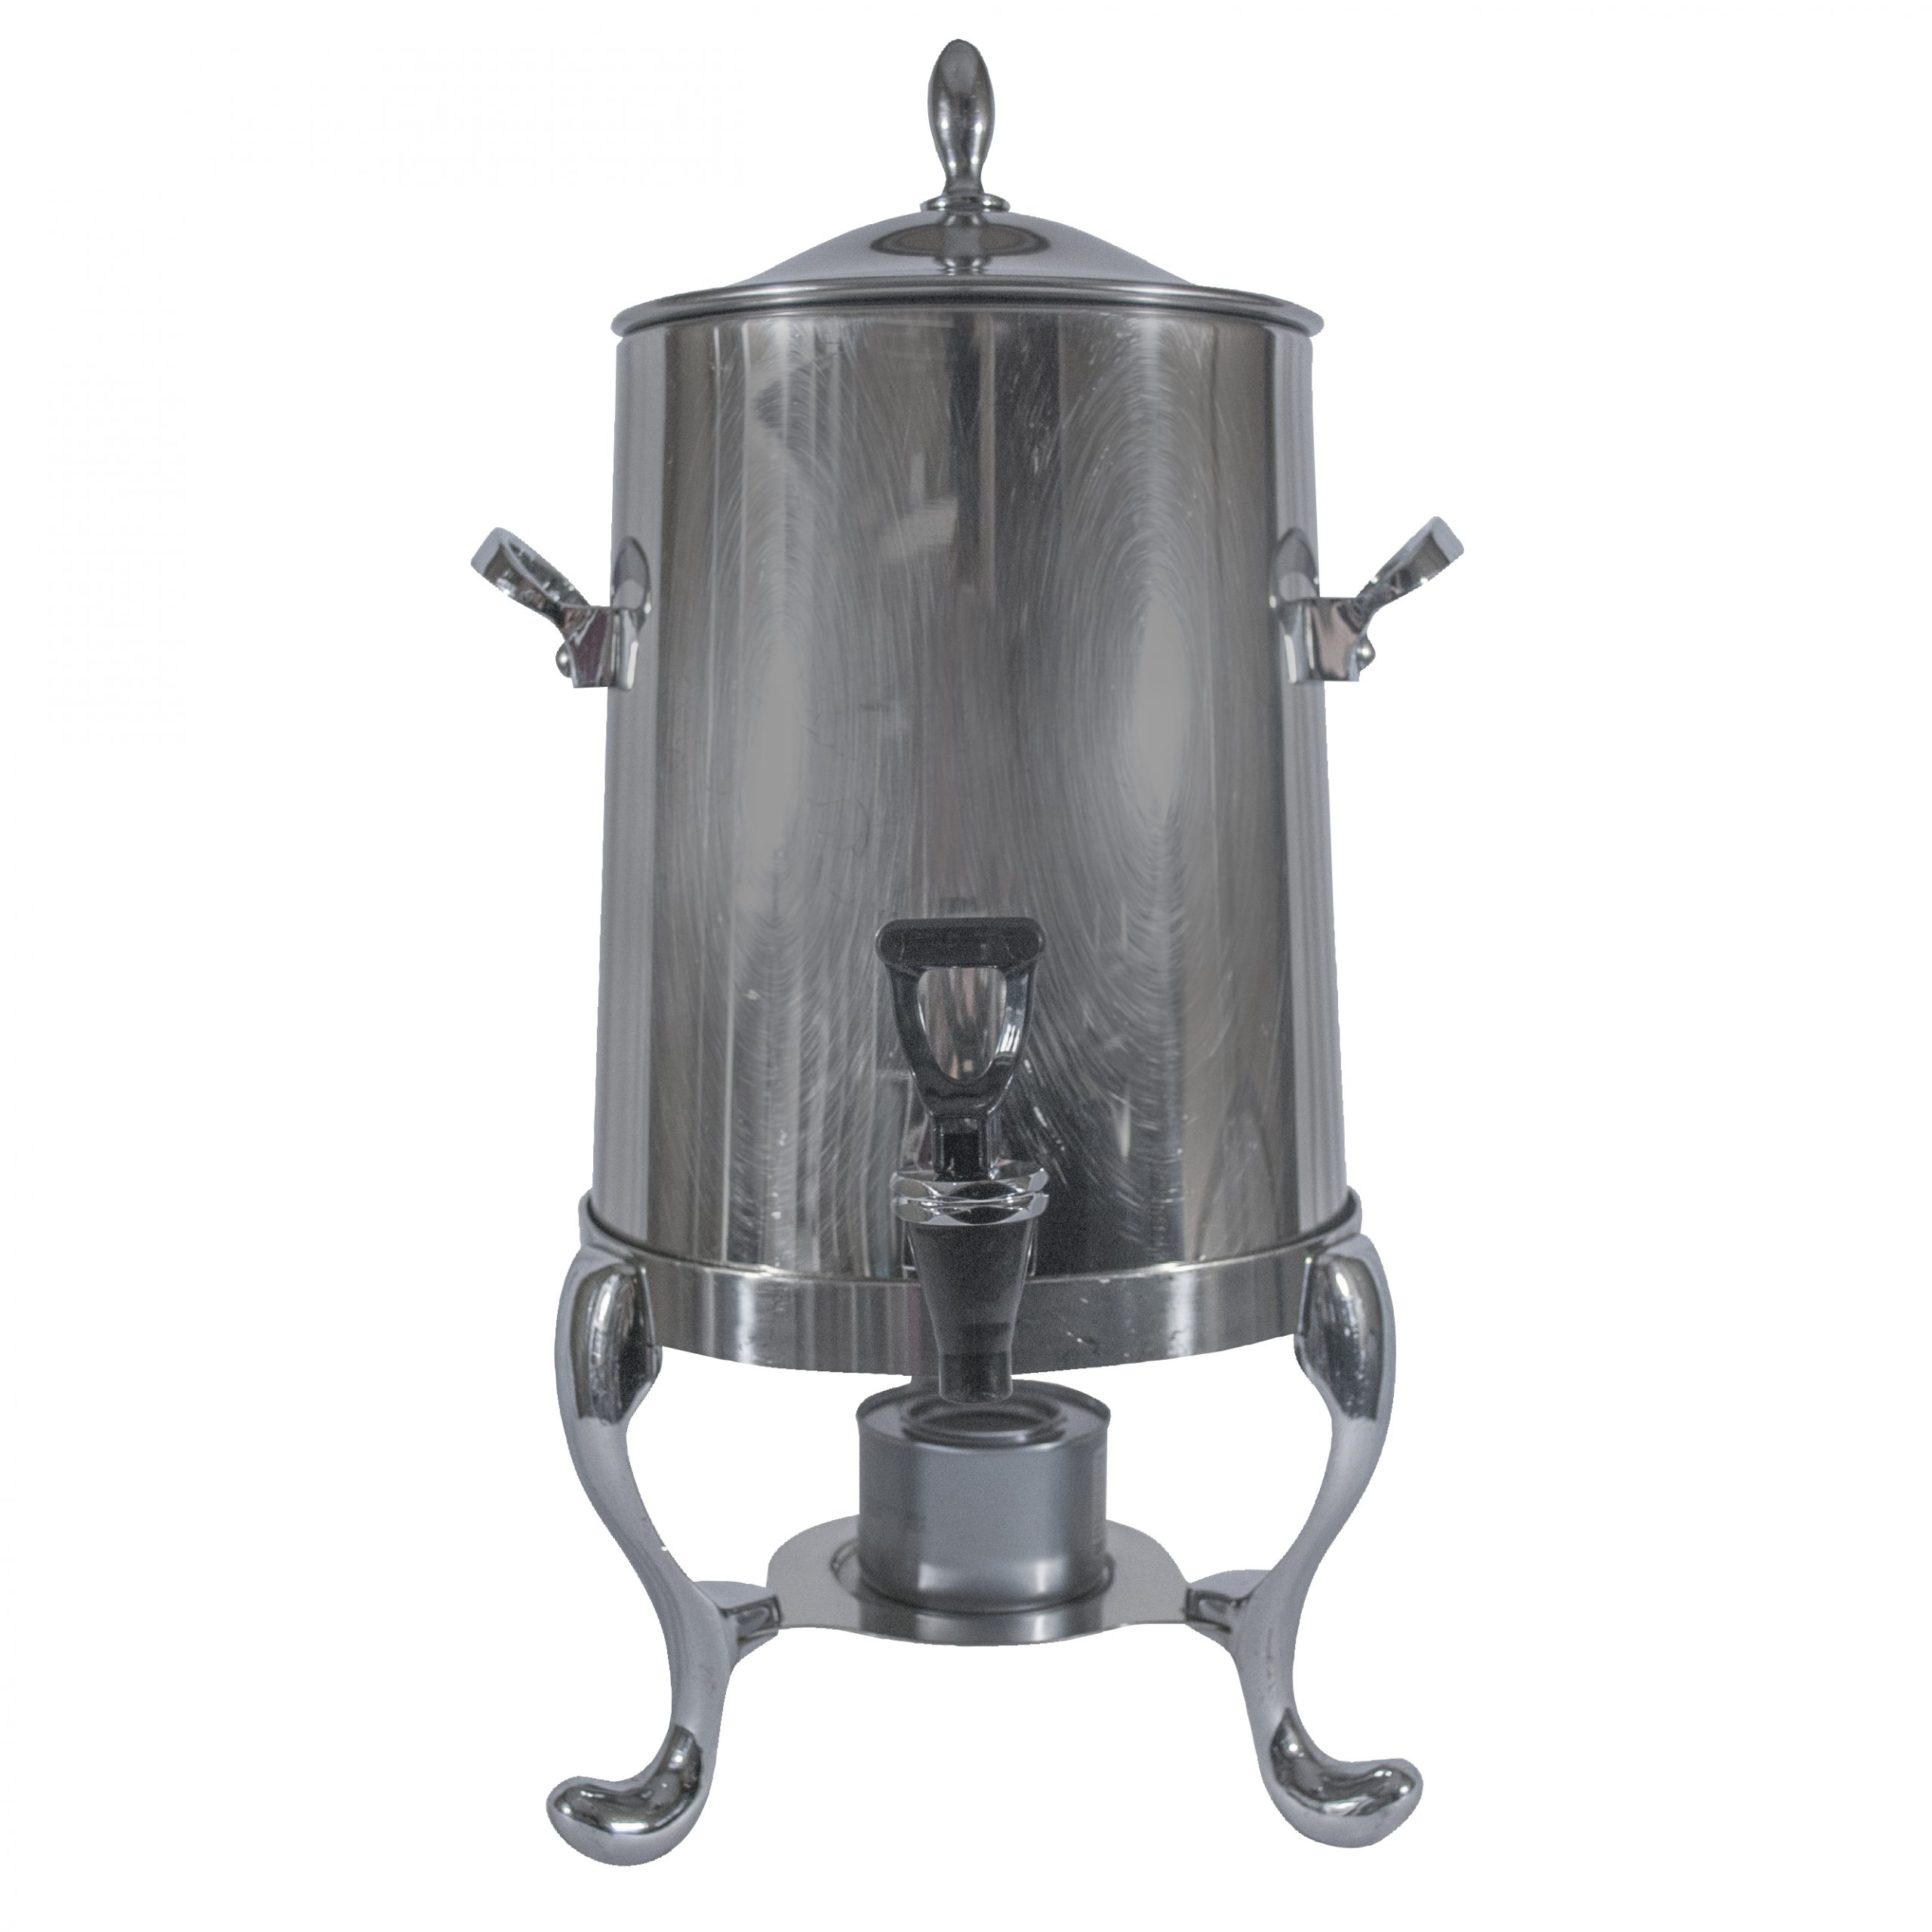 Coffee Urn 50 Cup - All Occasions Party Rental